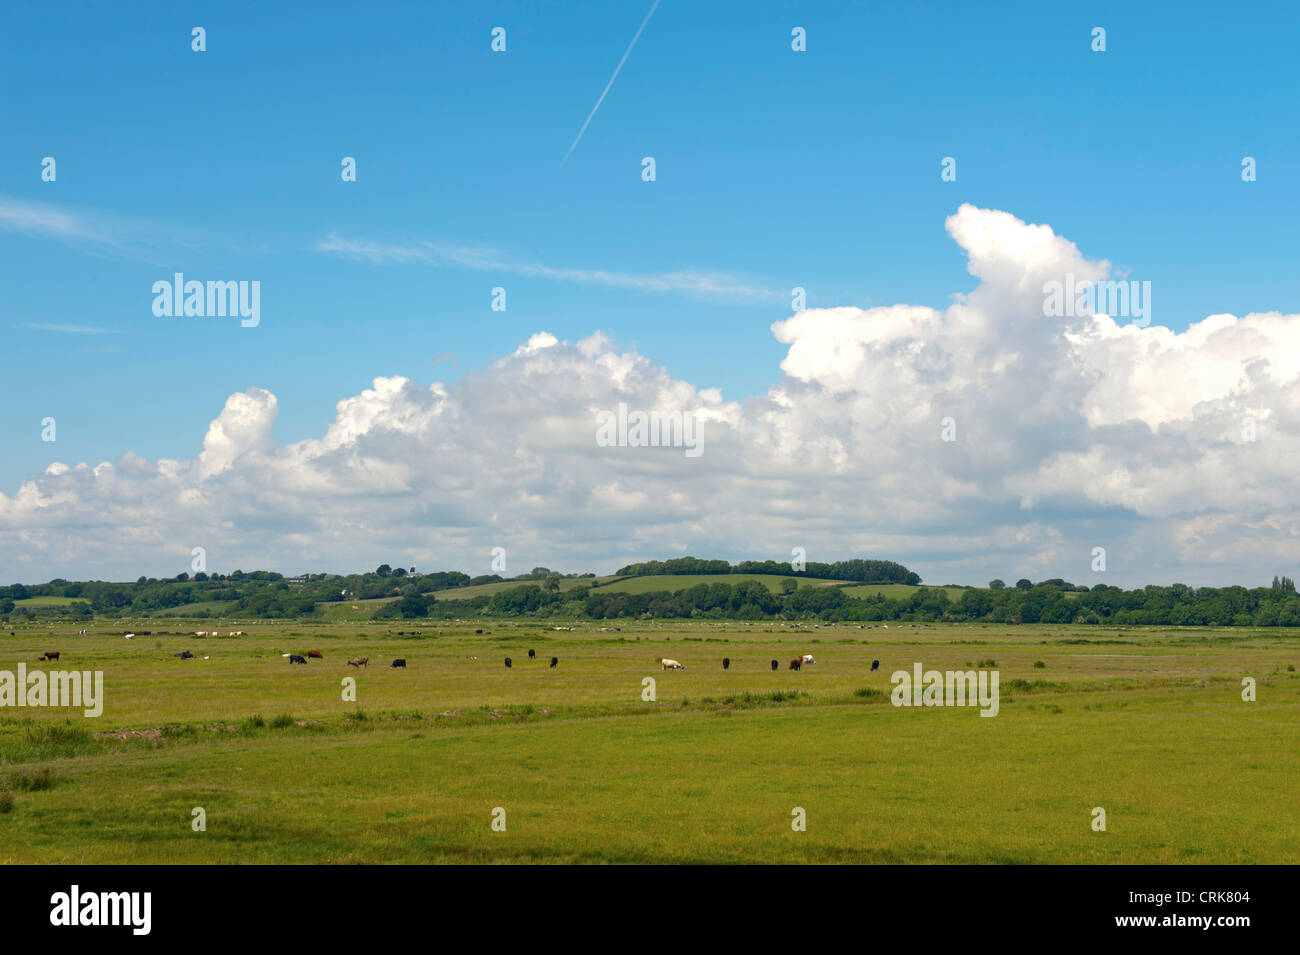 Kent countryside opposite the beach in Winchelsea, East Sussex, UK shwing the marsh lambs grazing with blue skies above. Stock Photo